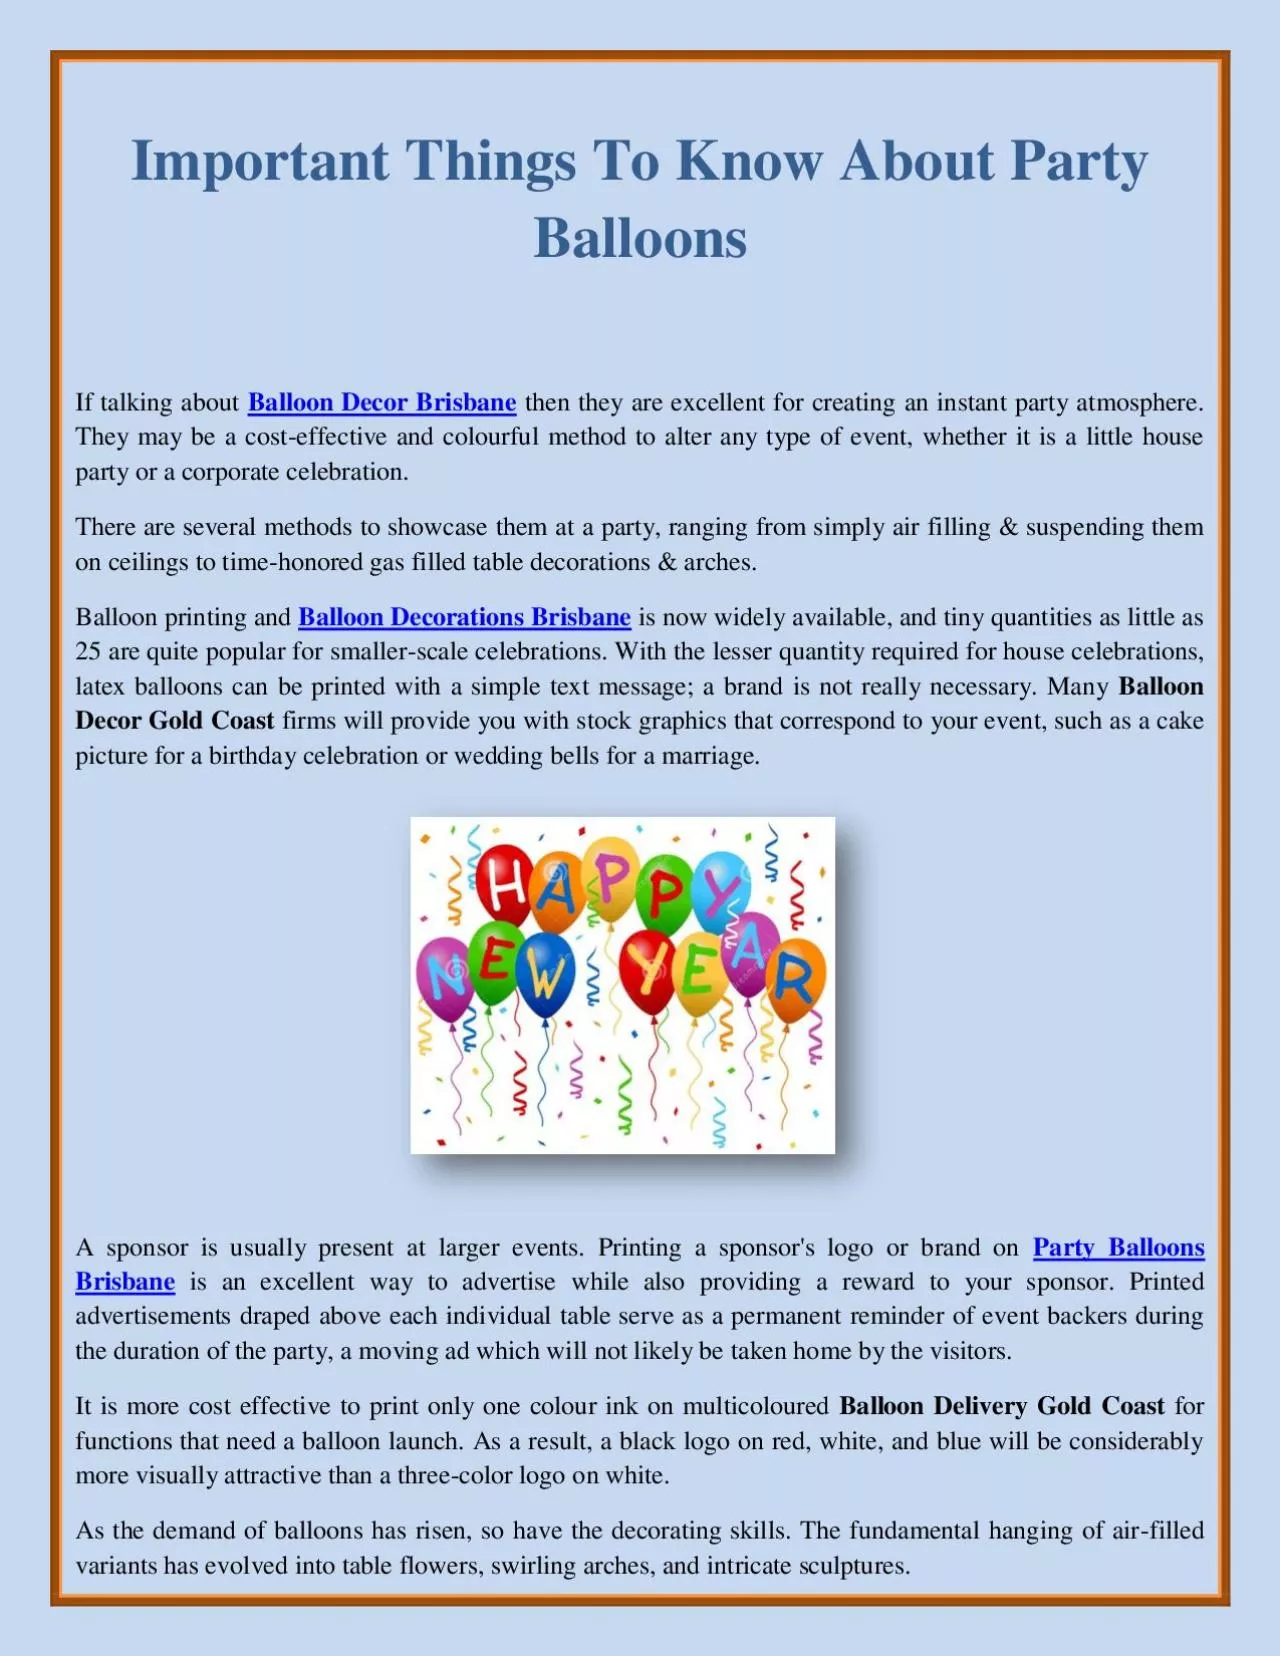 Important Things To Know About Party Balloons